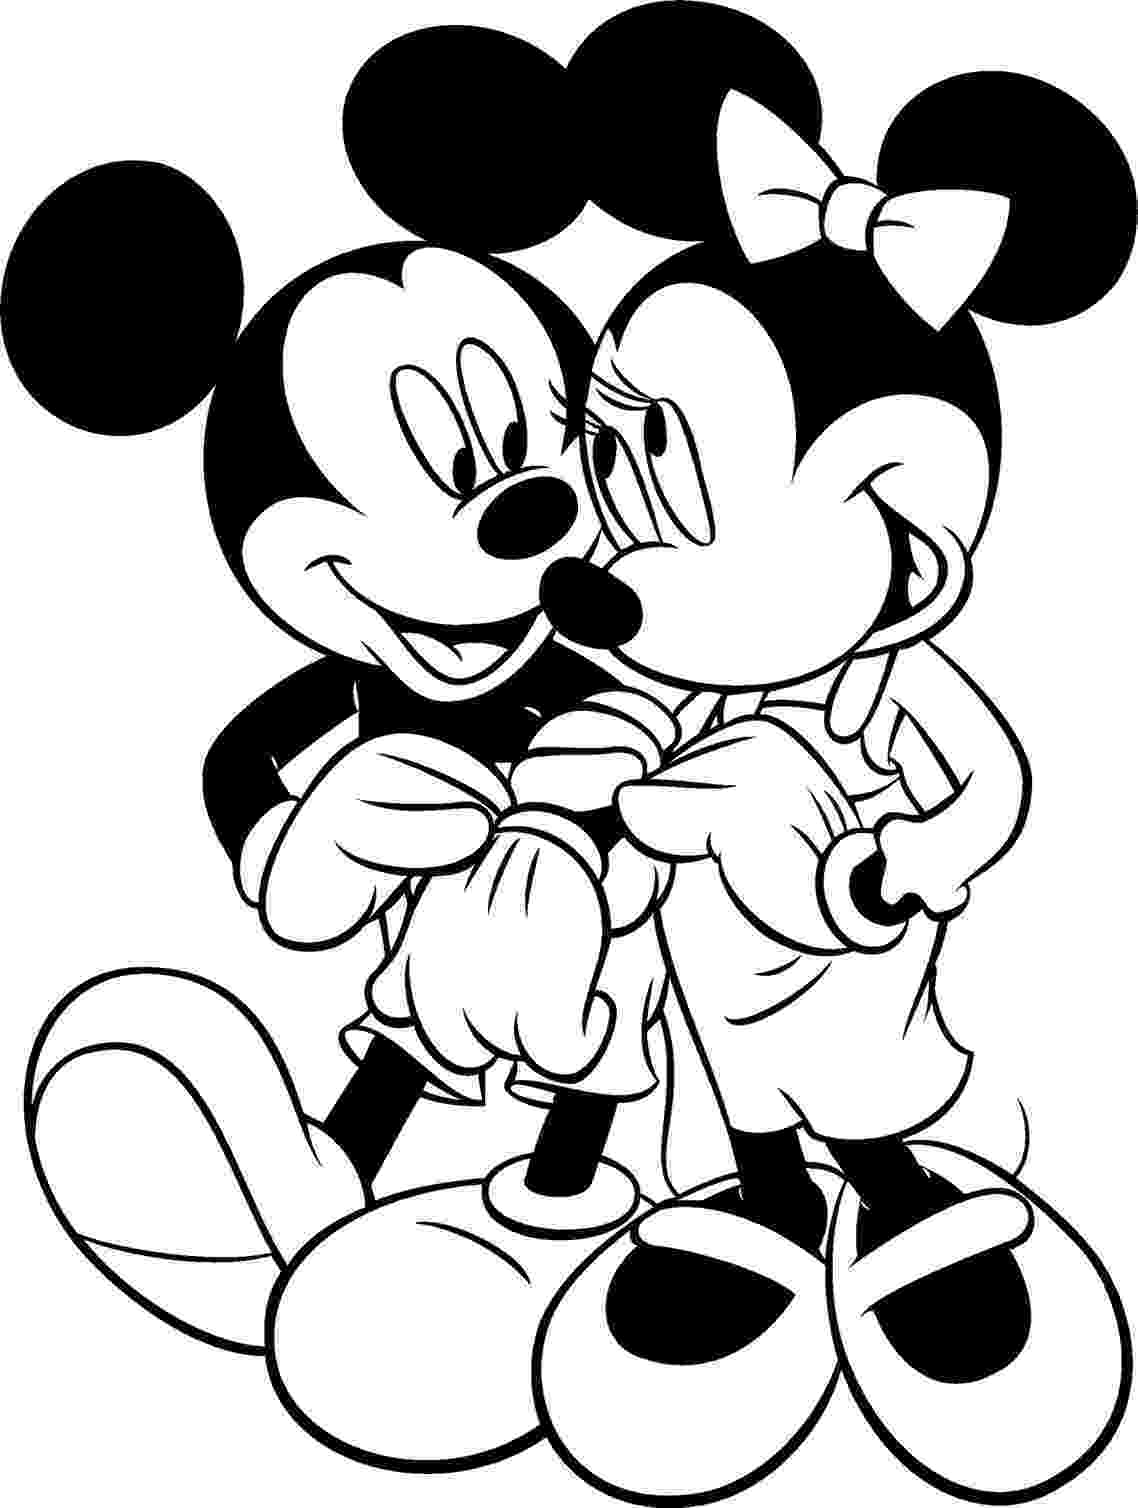 mickey mouse coloring pictures mickey mouse coloring pages 2 coloring pages to print coloring mickey pictures mouse 